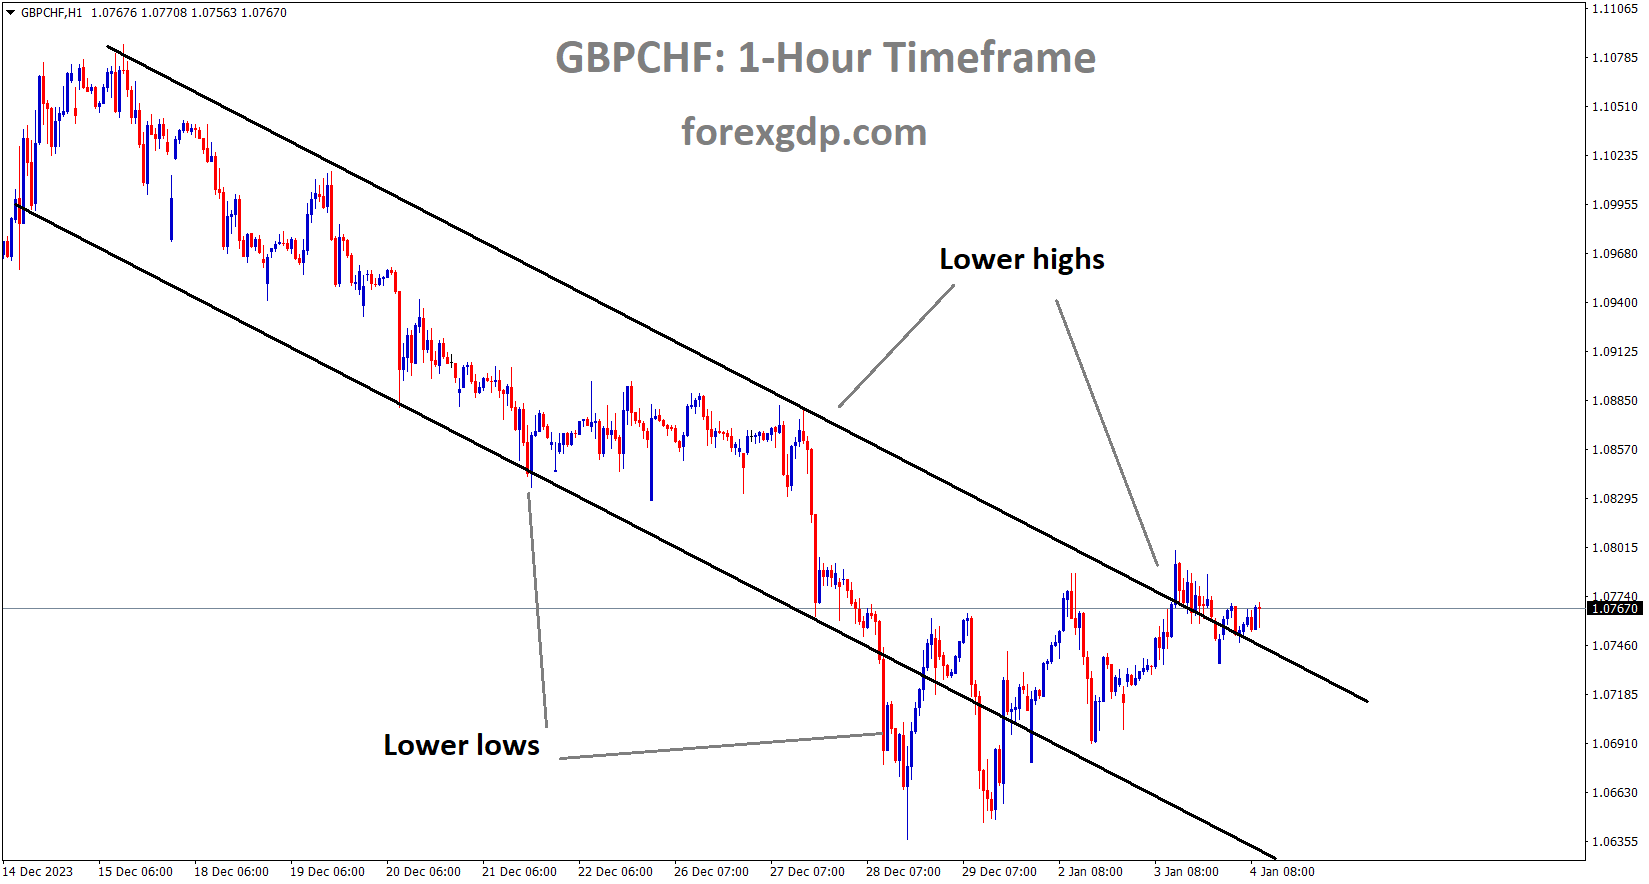 GBPCHF is moving in the Descending channel and the market has reached the lower high area of the channel